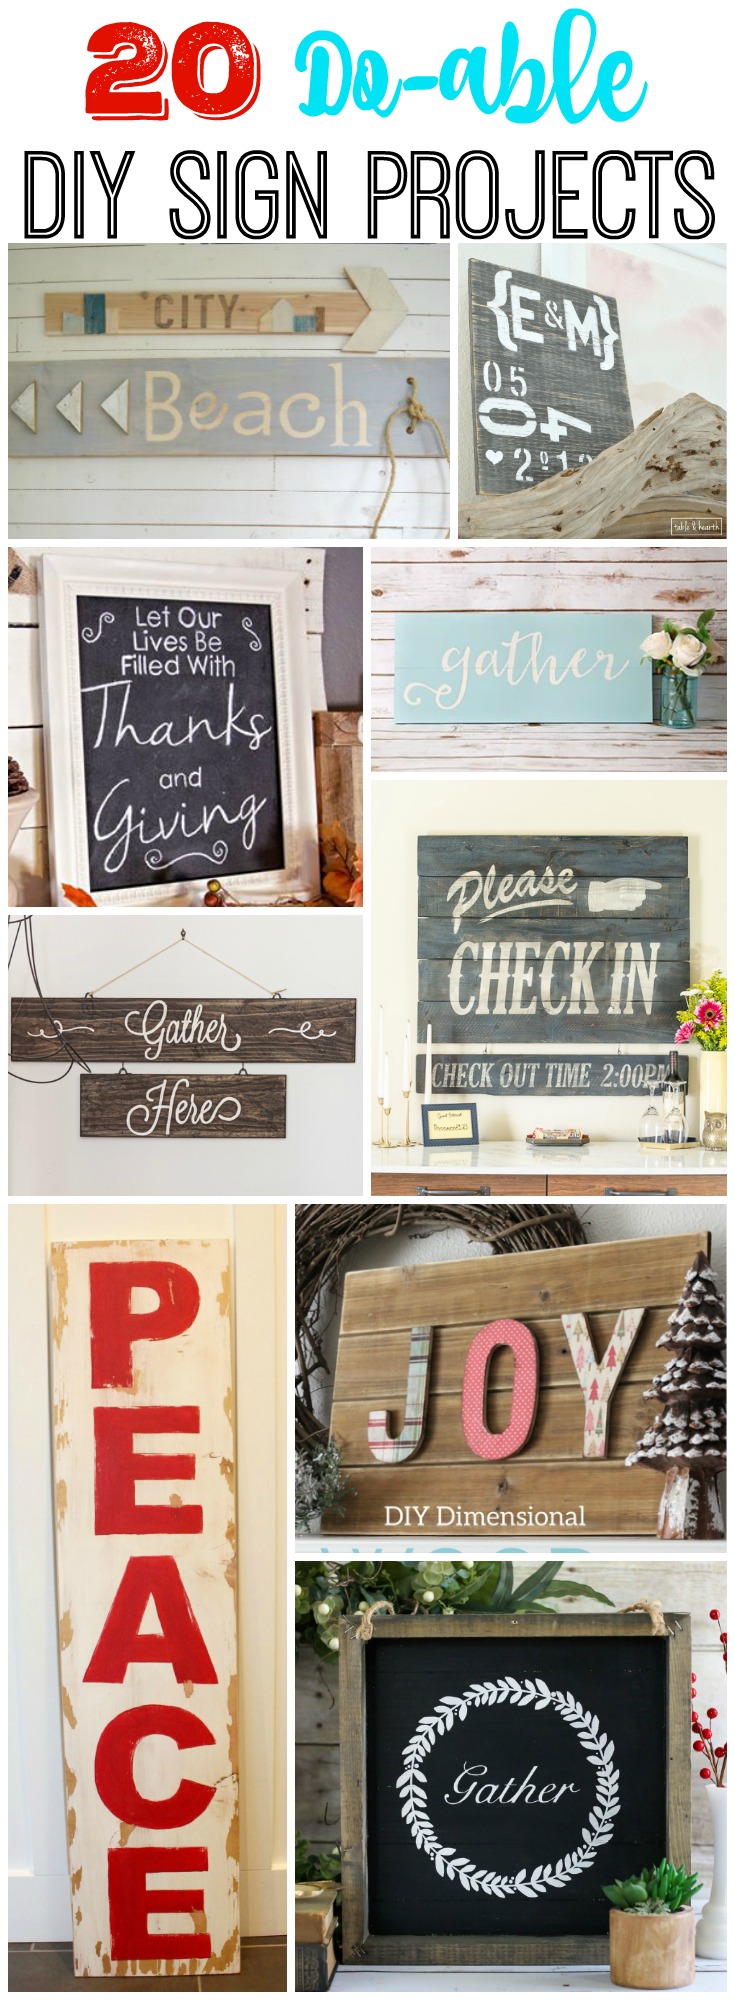 20 Do able DIY Sign Projects